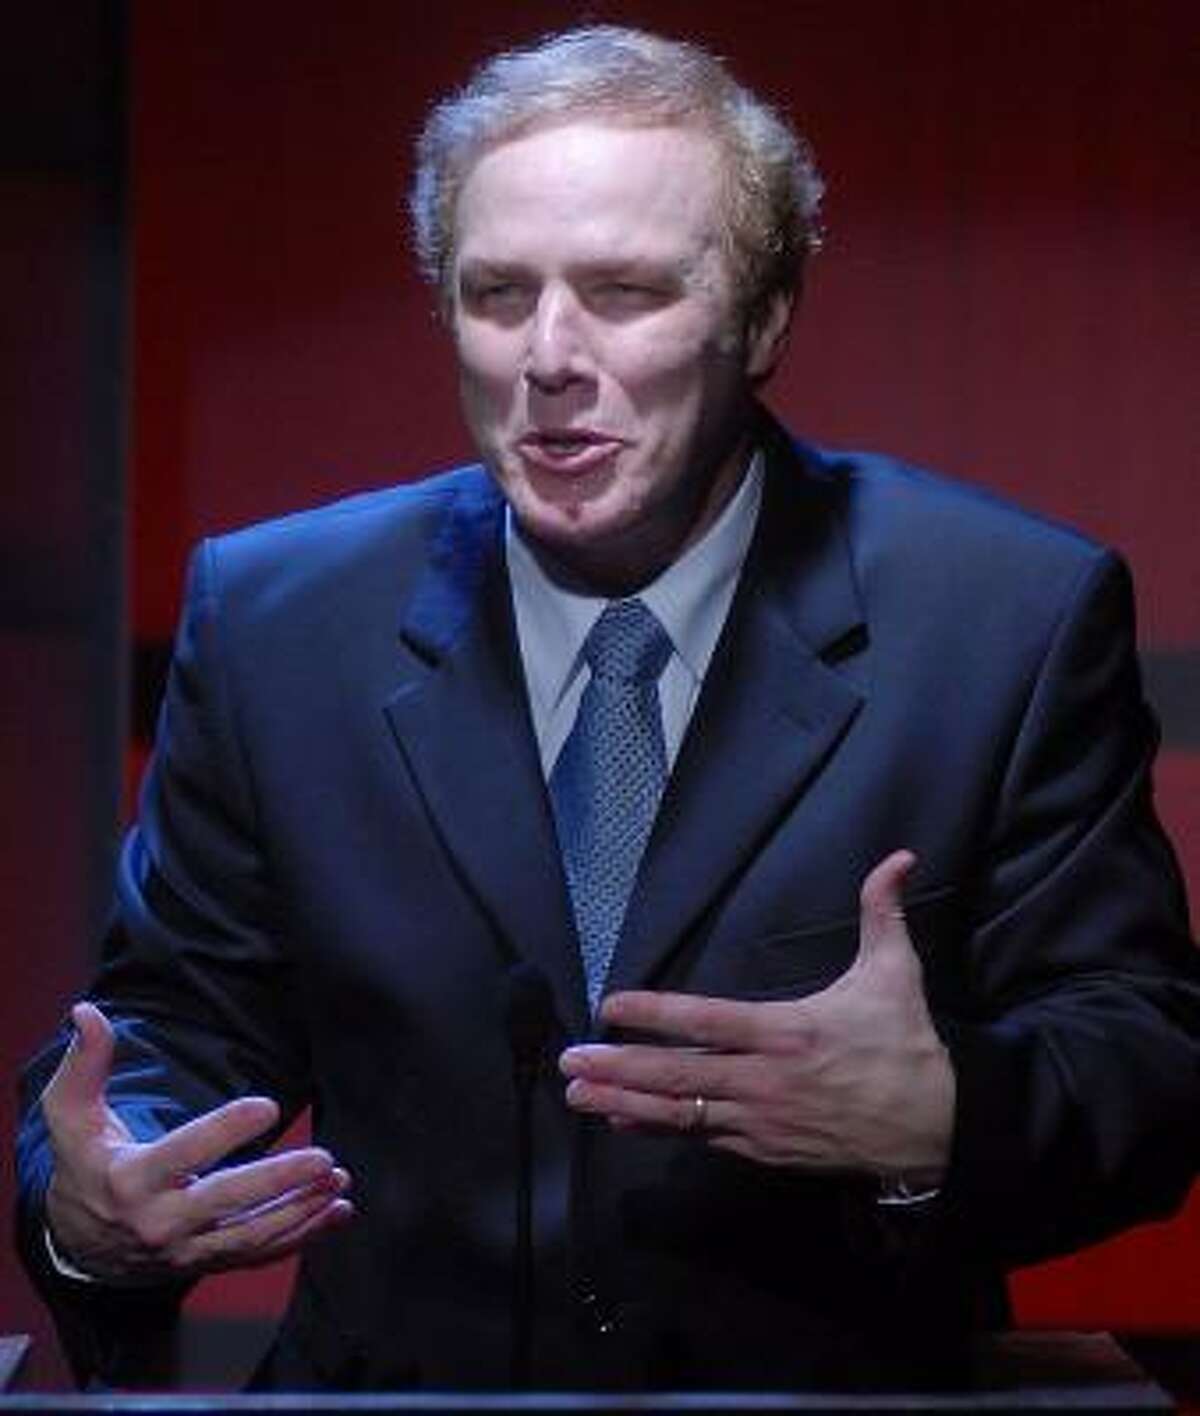 Paul Locklear's portrayal of President George W. Bush in Catastrophic Theatre's The Strangerer had even his director in stitches.